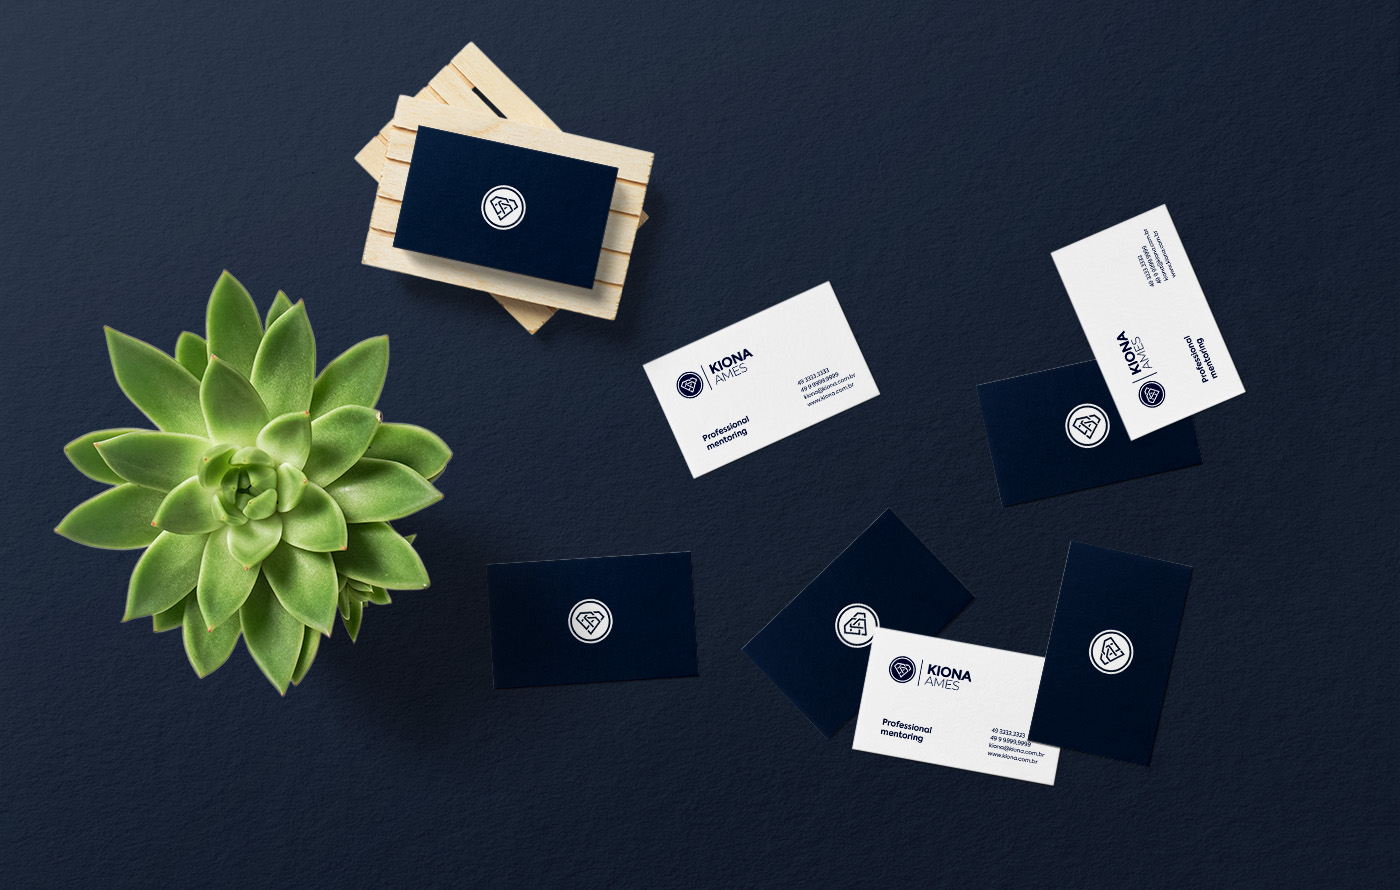 Agency Design create a new Branding for Psychologist and Professional Mentoring